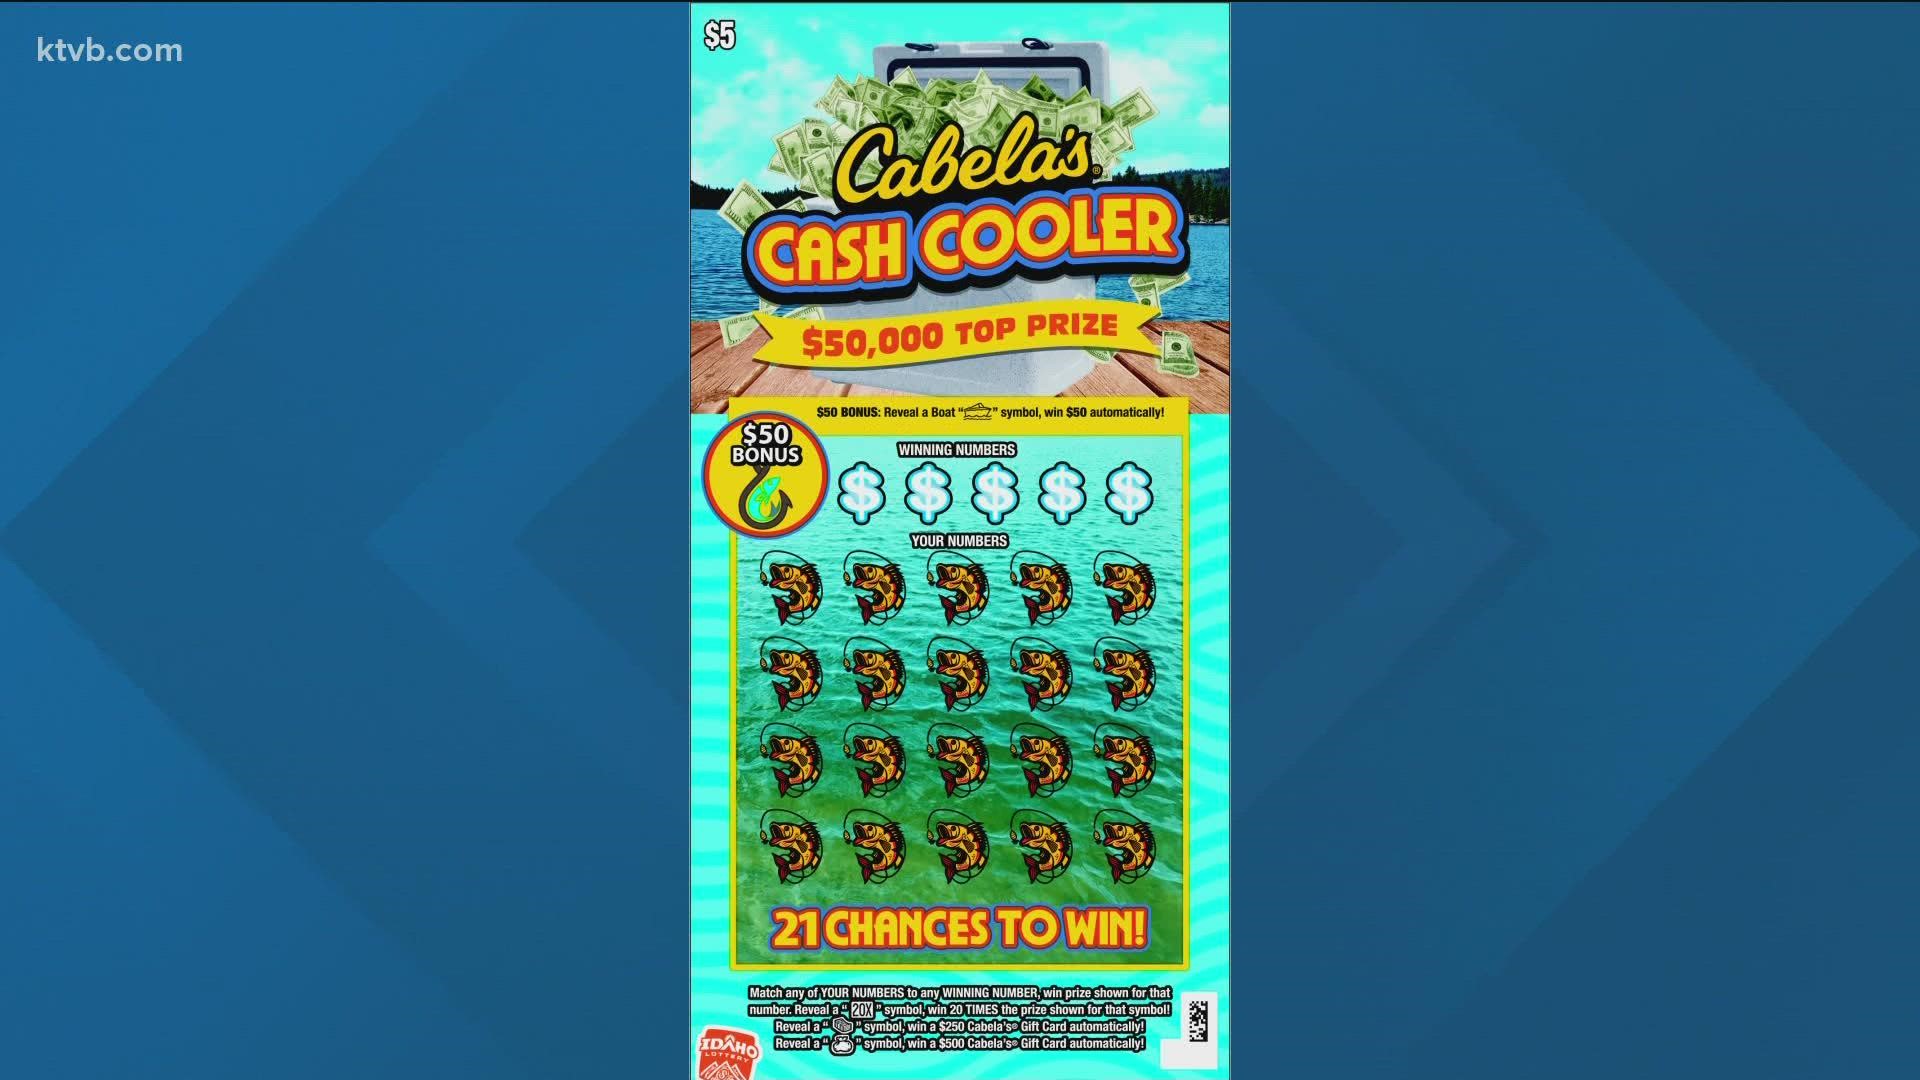 The "Cabela's Cash Cooler" game includes two top prizes of $50,000 and is debuting at Idaho Lottery retail locations this week.